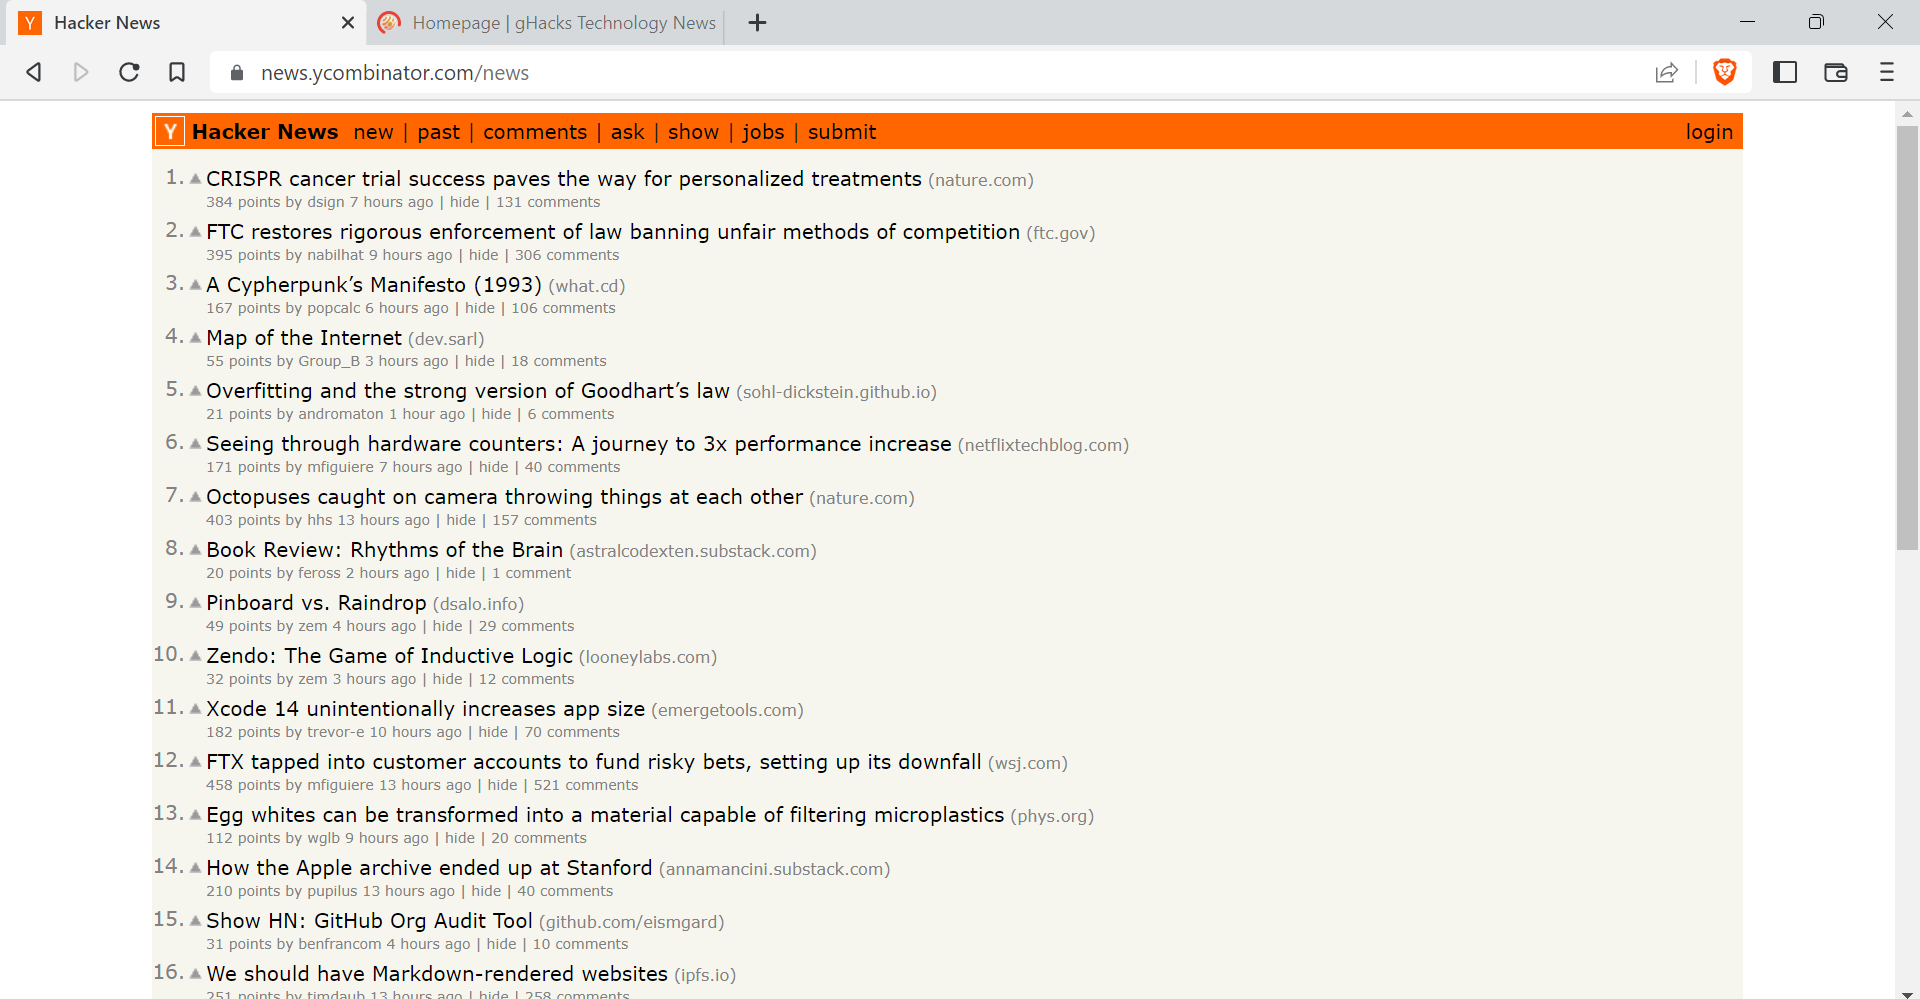 How to subscribe to Hacker News custom RSS feeds